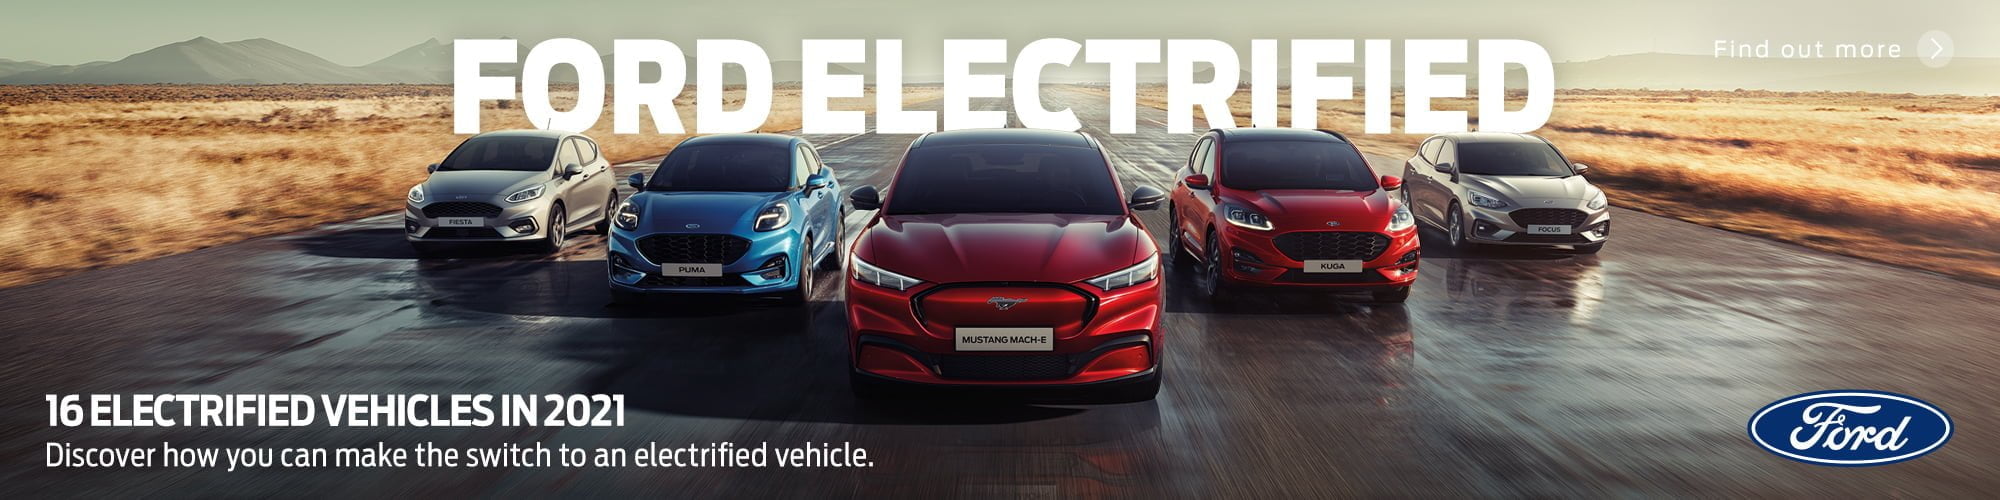 Ford Electrified